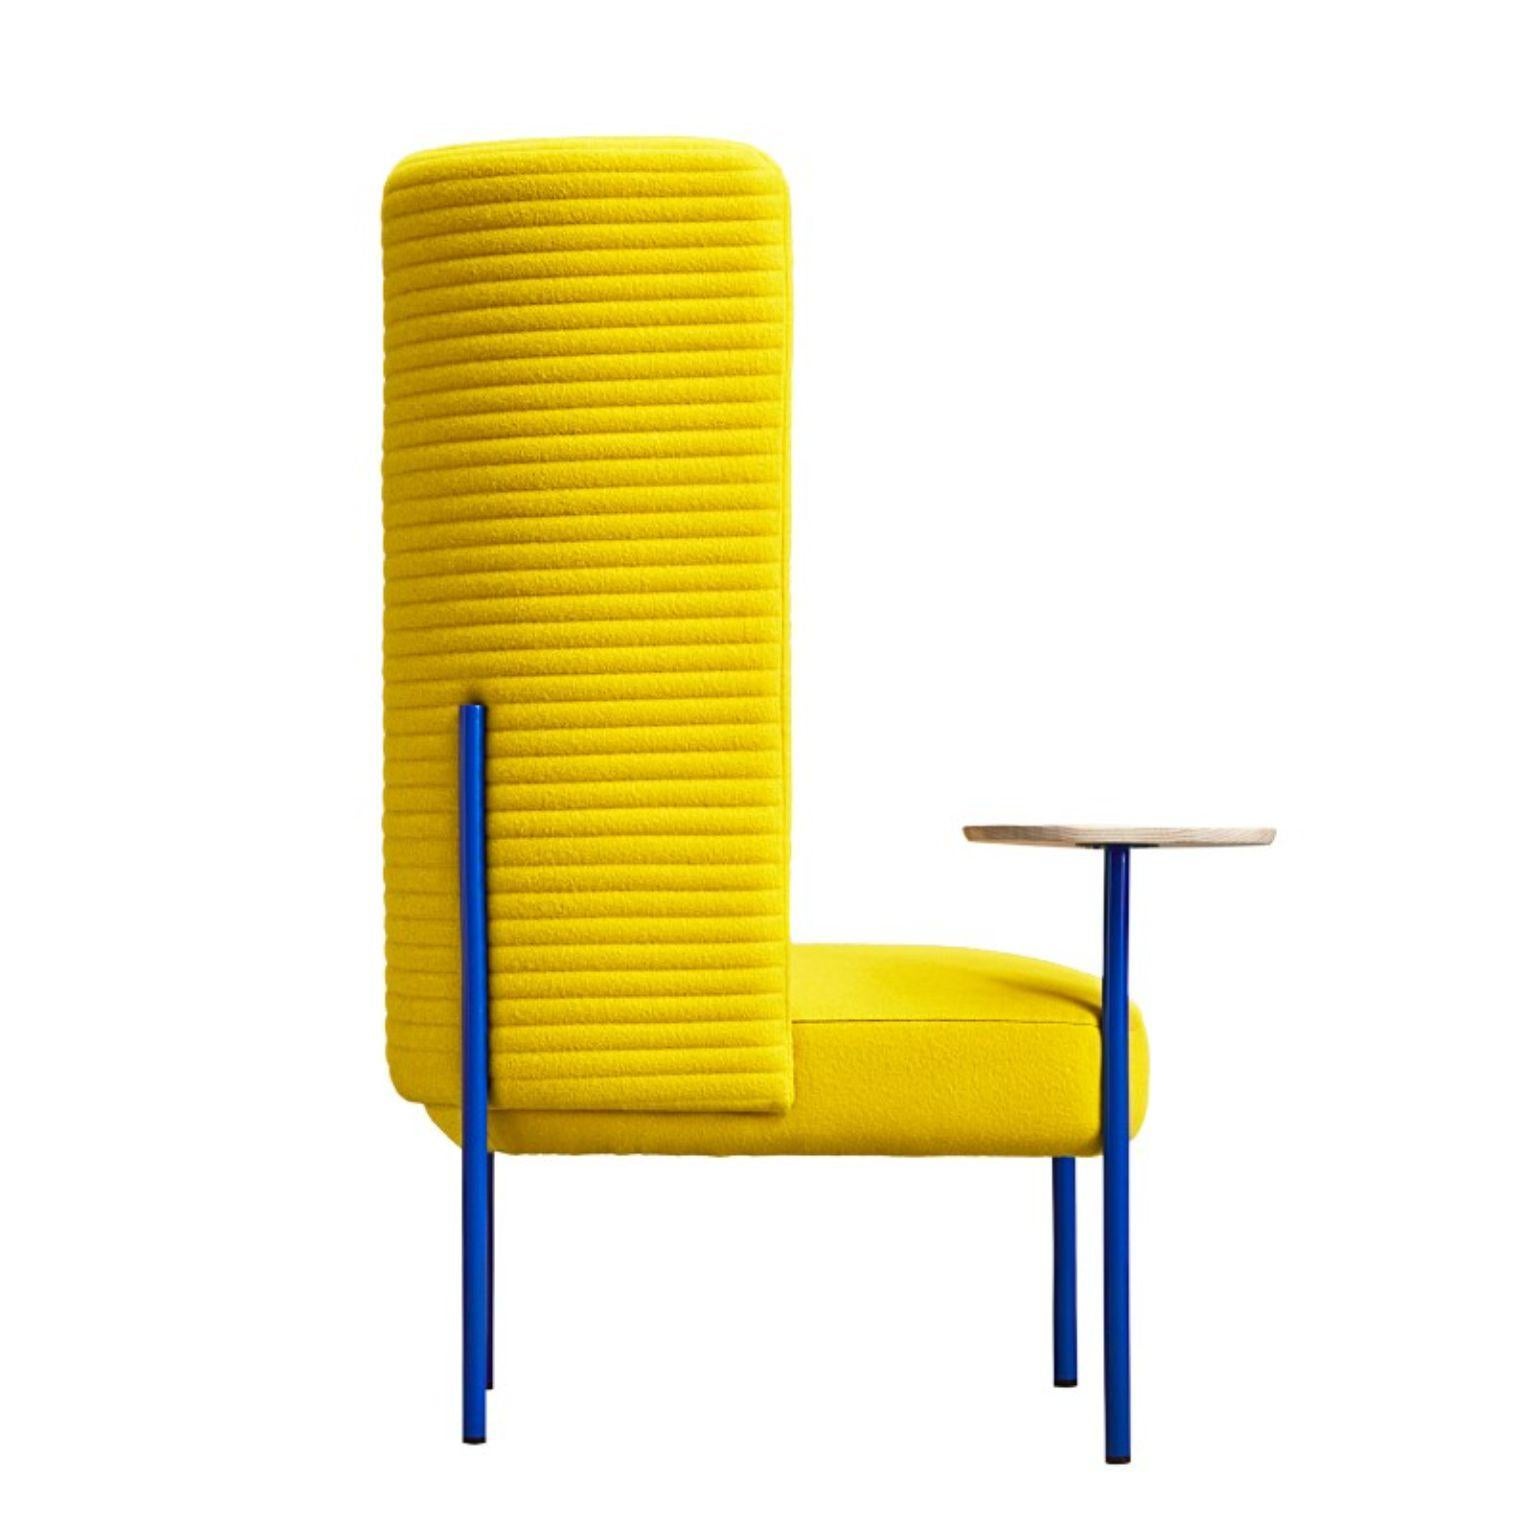 Ara armchair by PerezOchando
Dimensions: W 74, D 74, H 125, Seat 43
Materials: Iron backrest structure and pine wood seat structure
Foam CMHR (high resilience and flame retardant) for all our cushion filling systems
Cushion 50% goose feathers